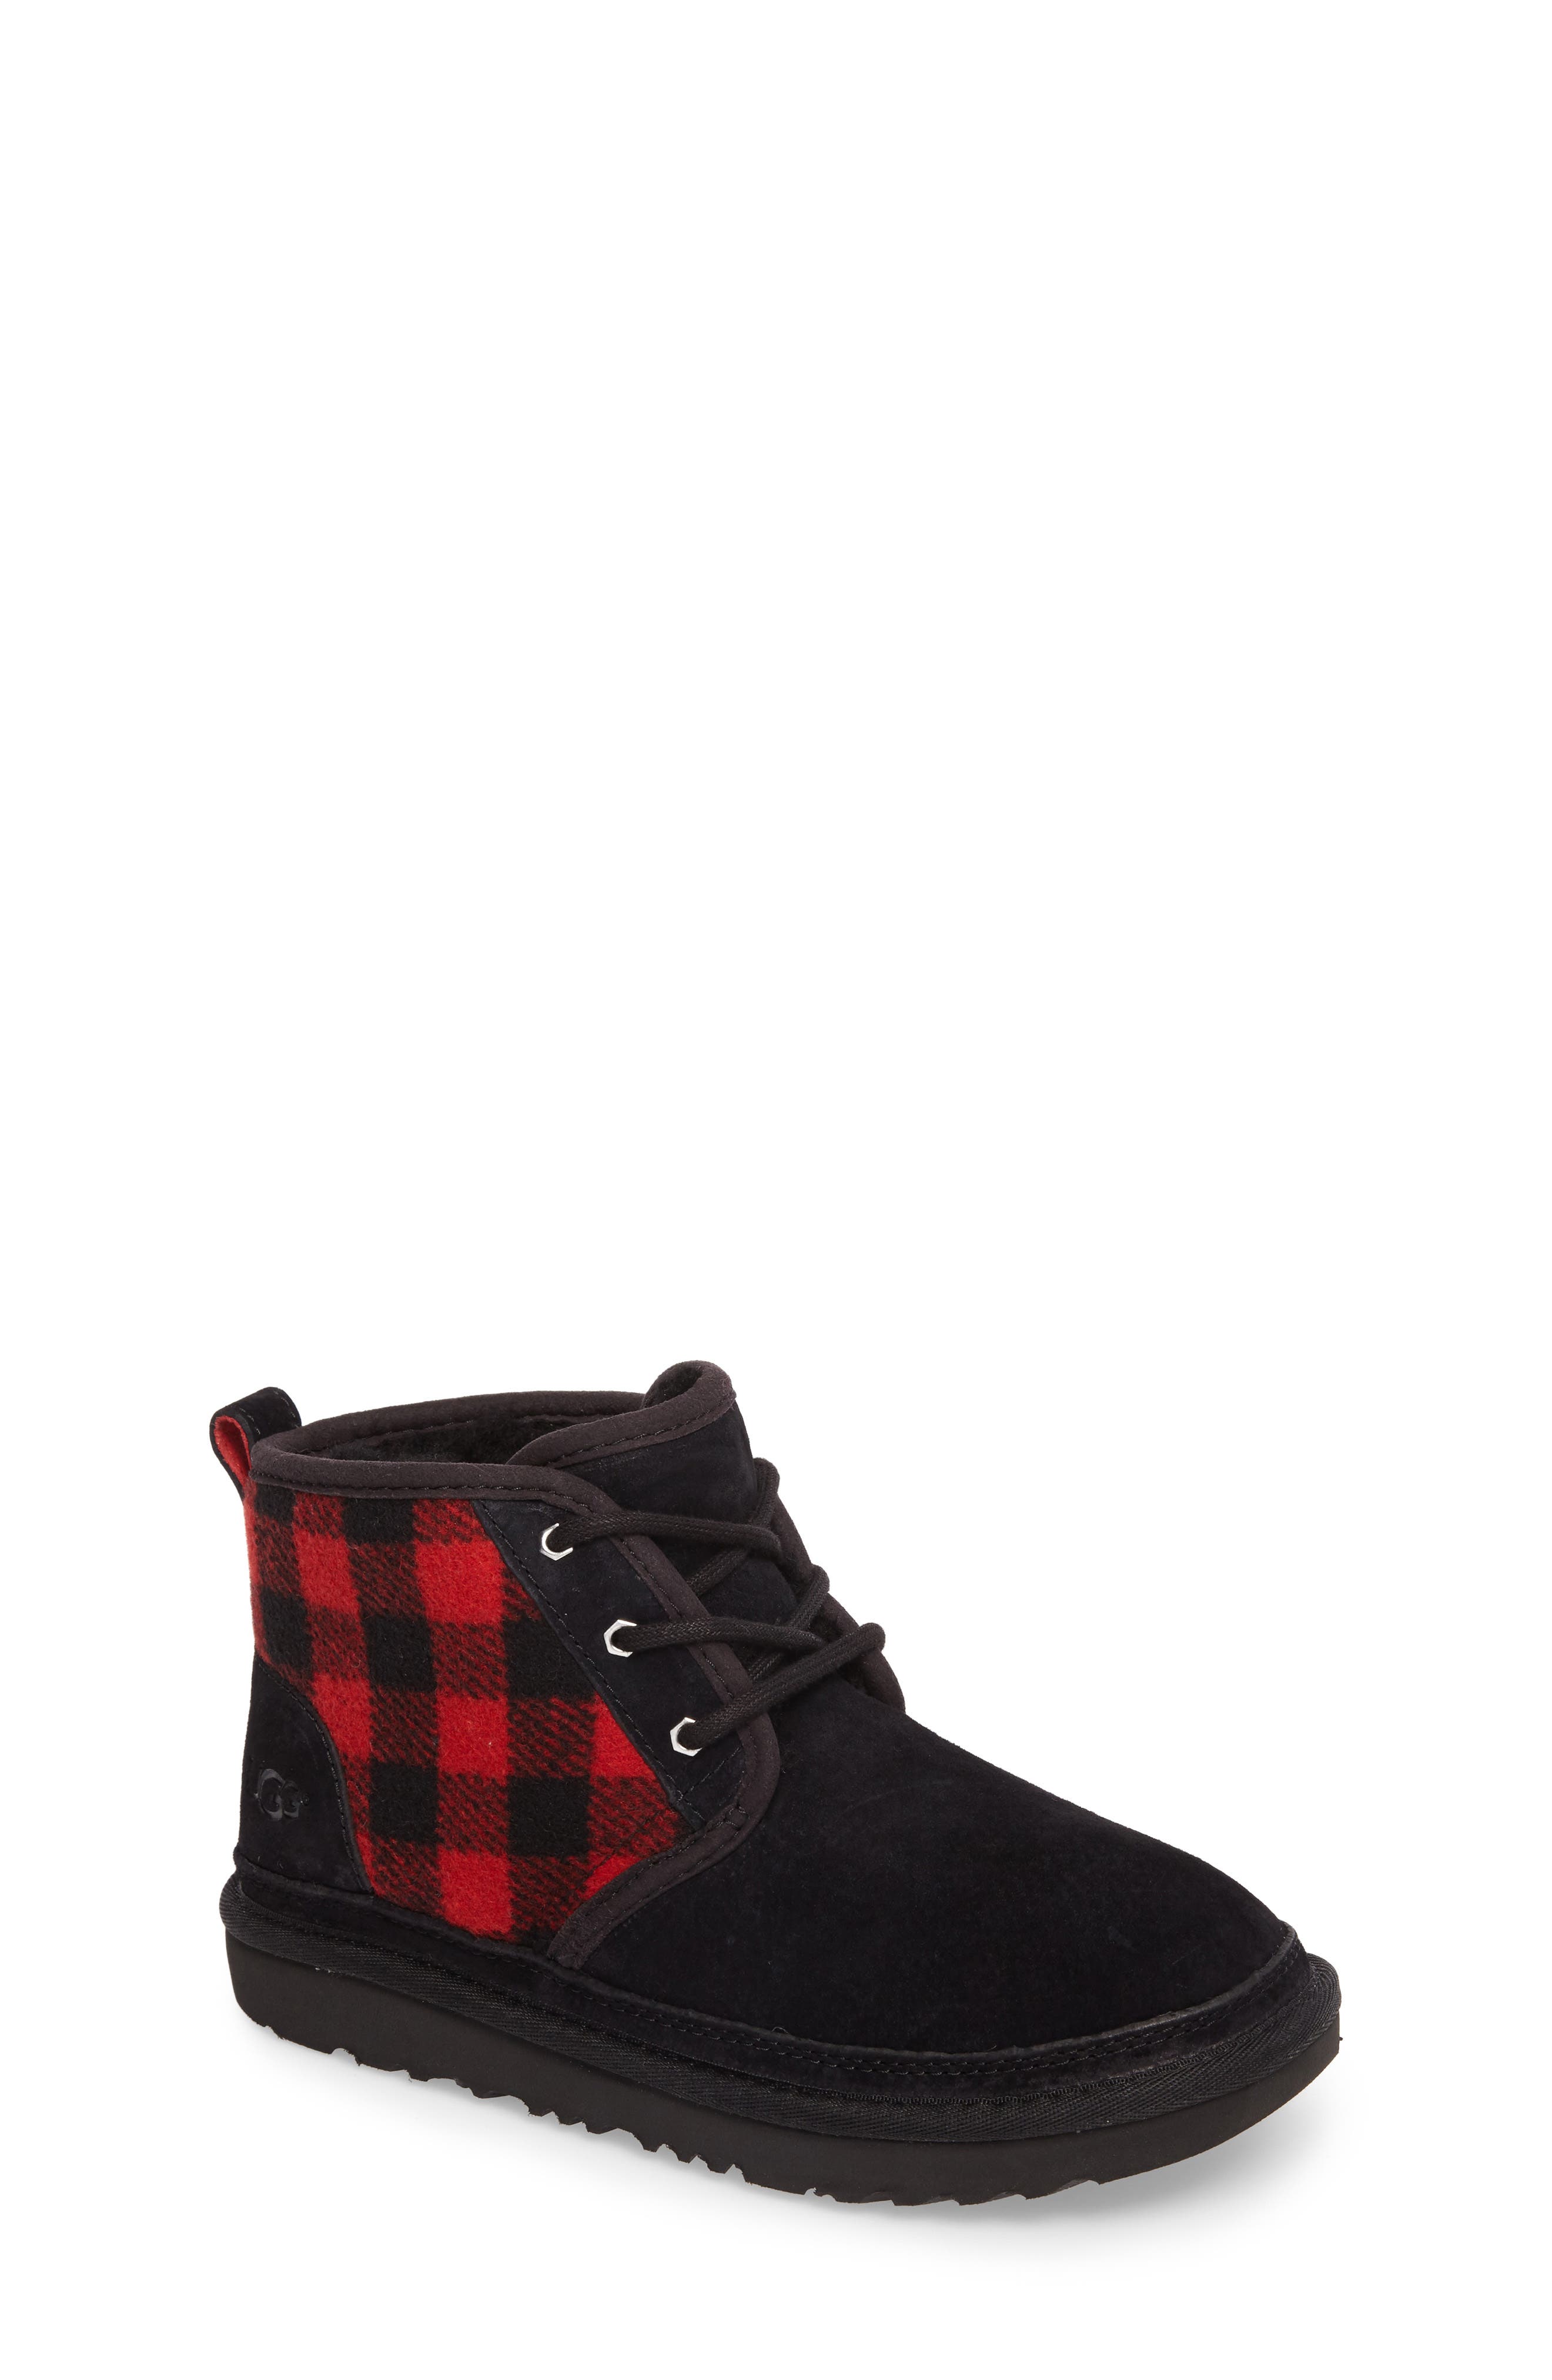 red and black ugg boots